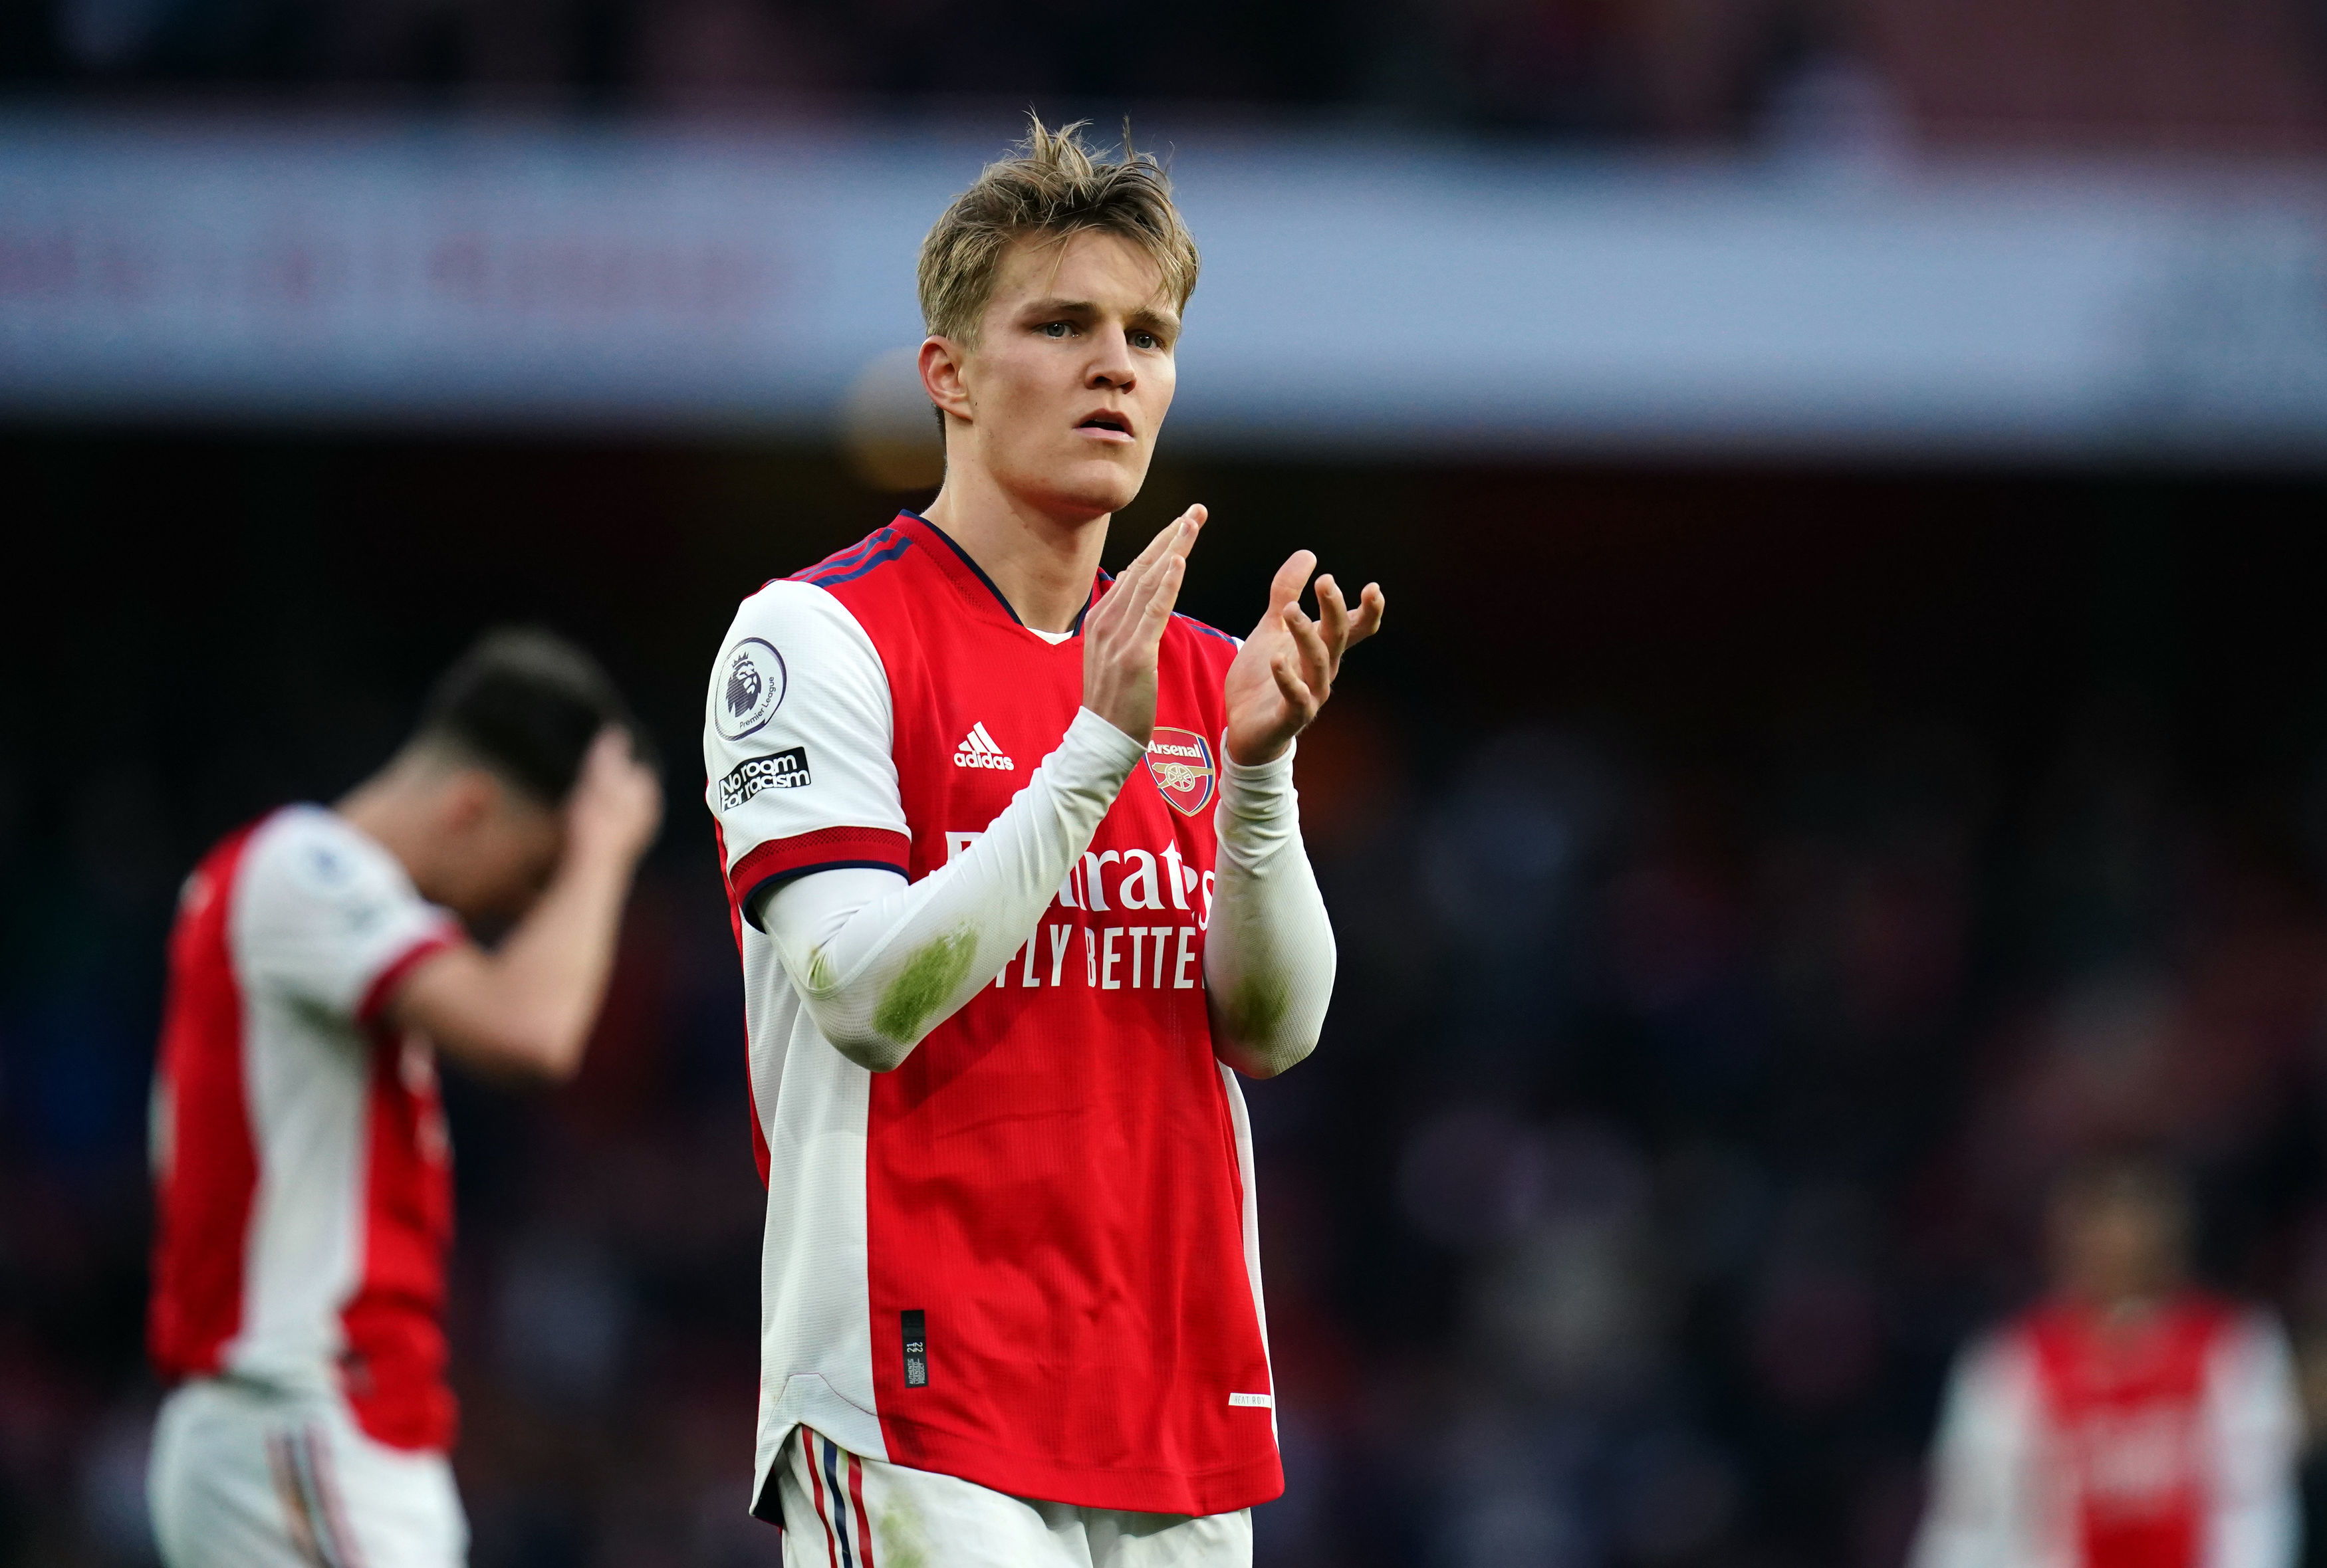 Humble' Martin Odegaard could be Arsenal's next permanent captain, hints Arteta after picking brains of his Norway boss. The US Sun